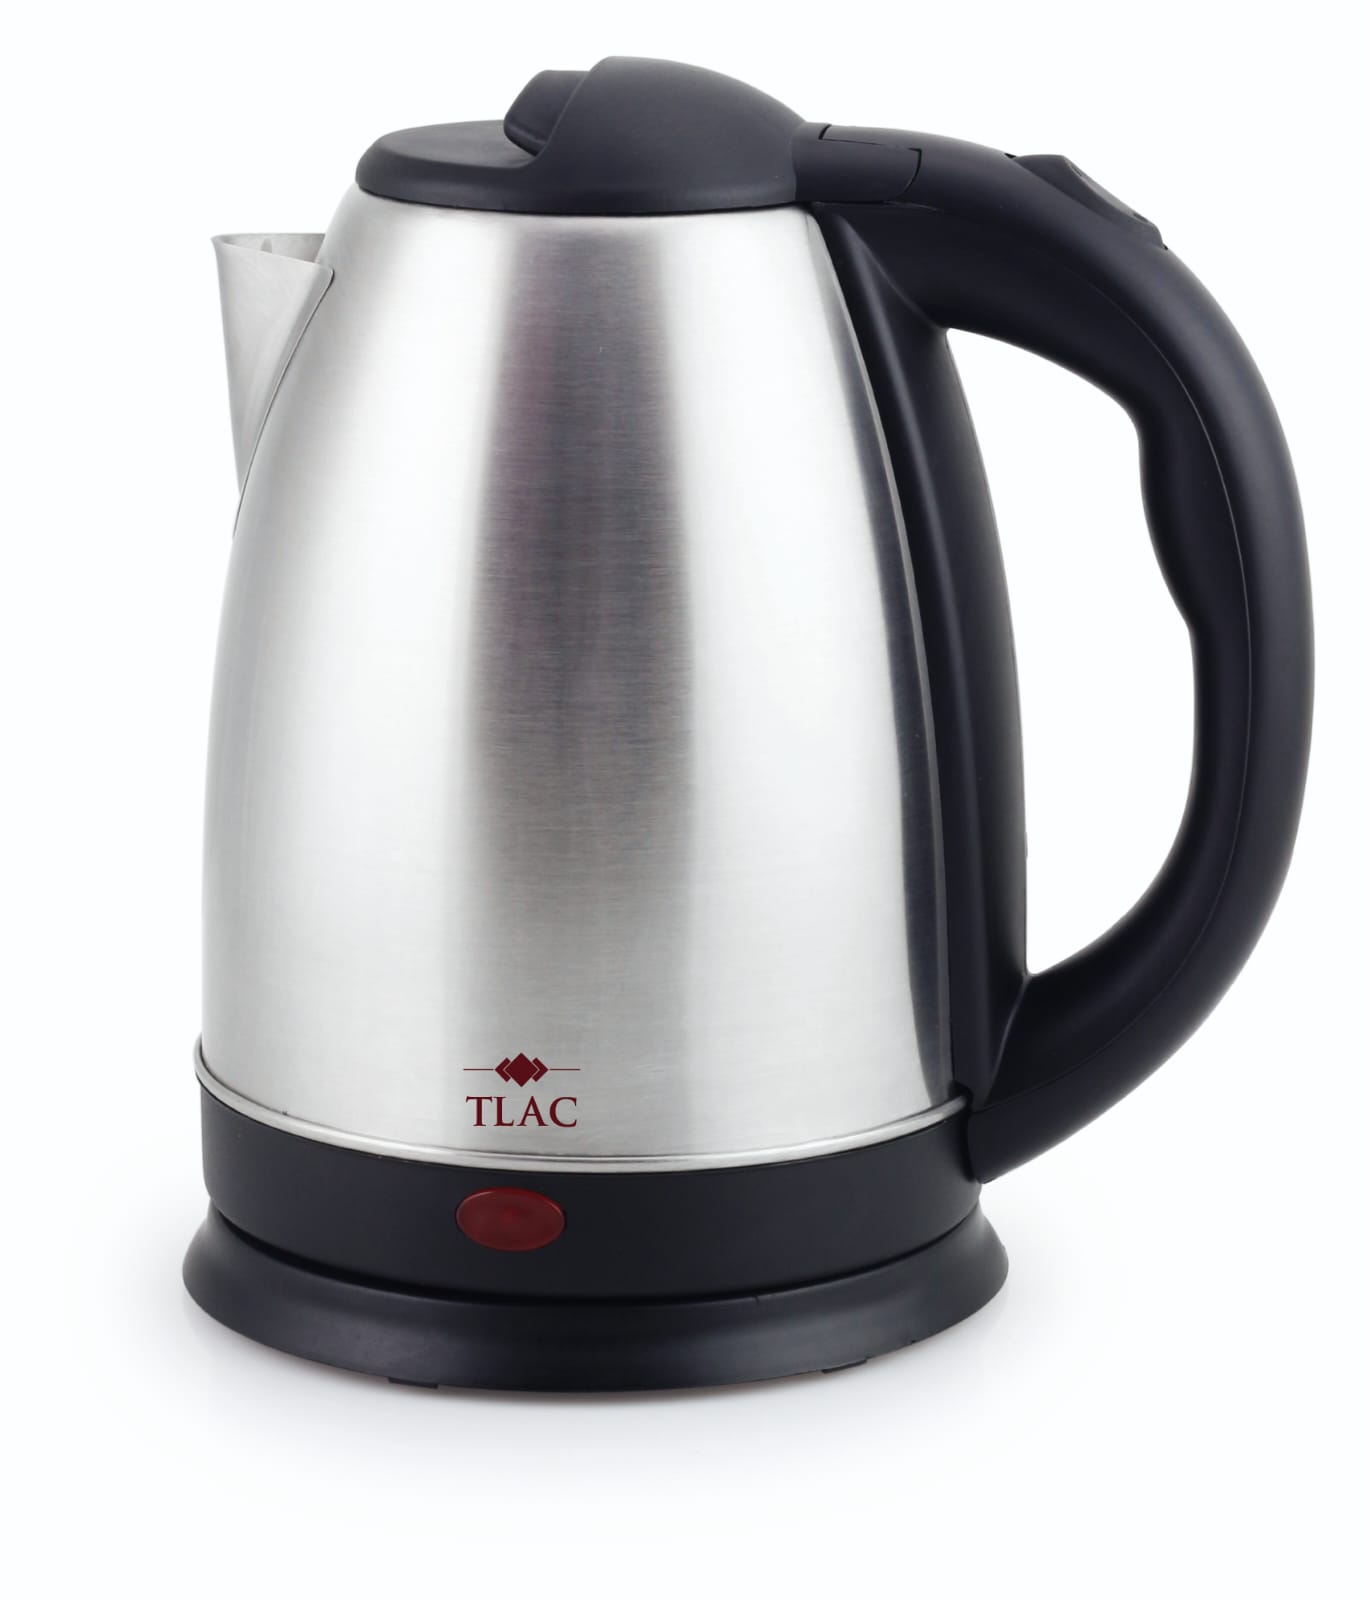 TLAC Electric cordles kettle - stainless steel